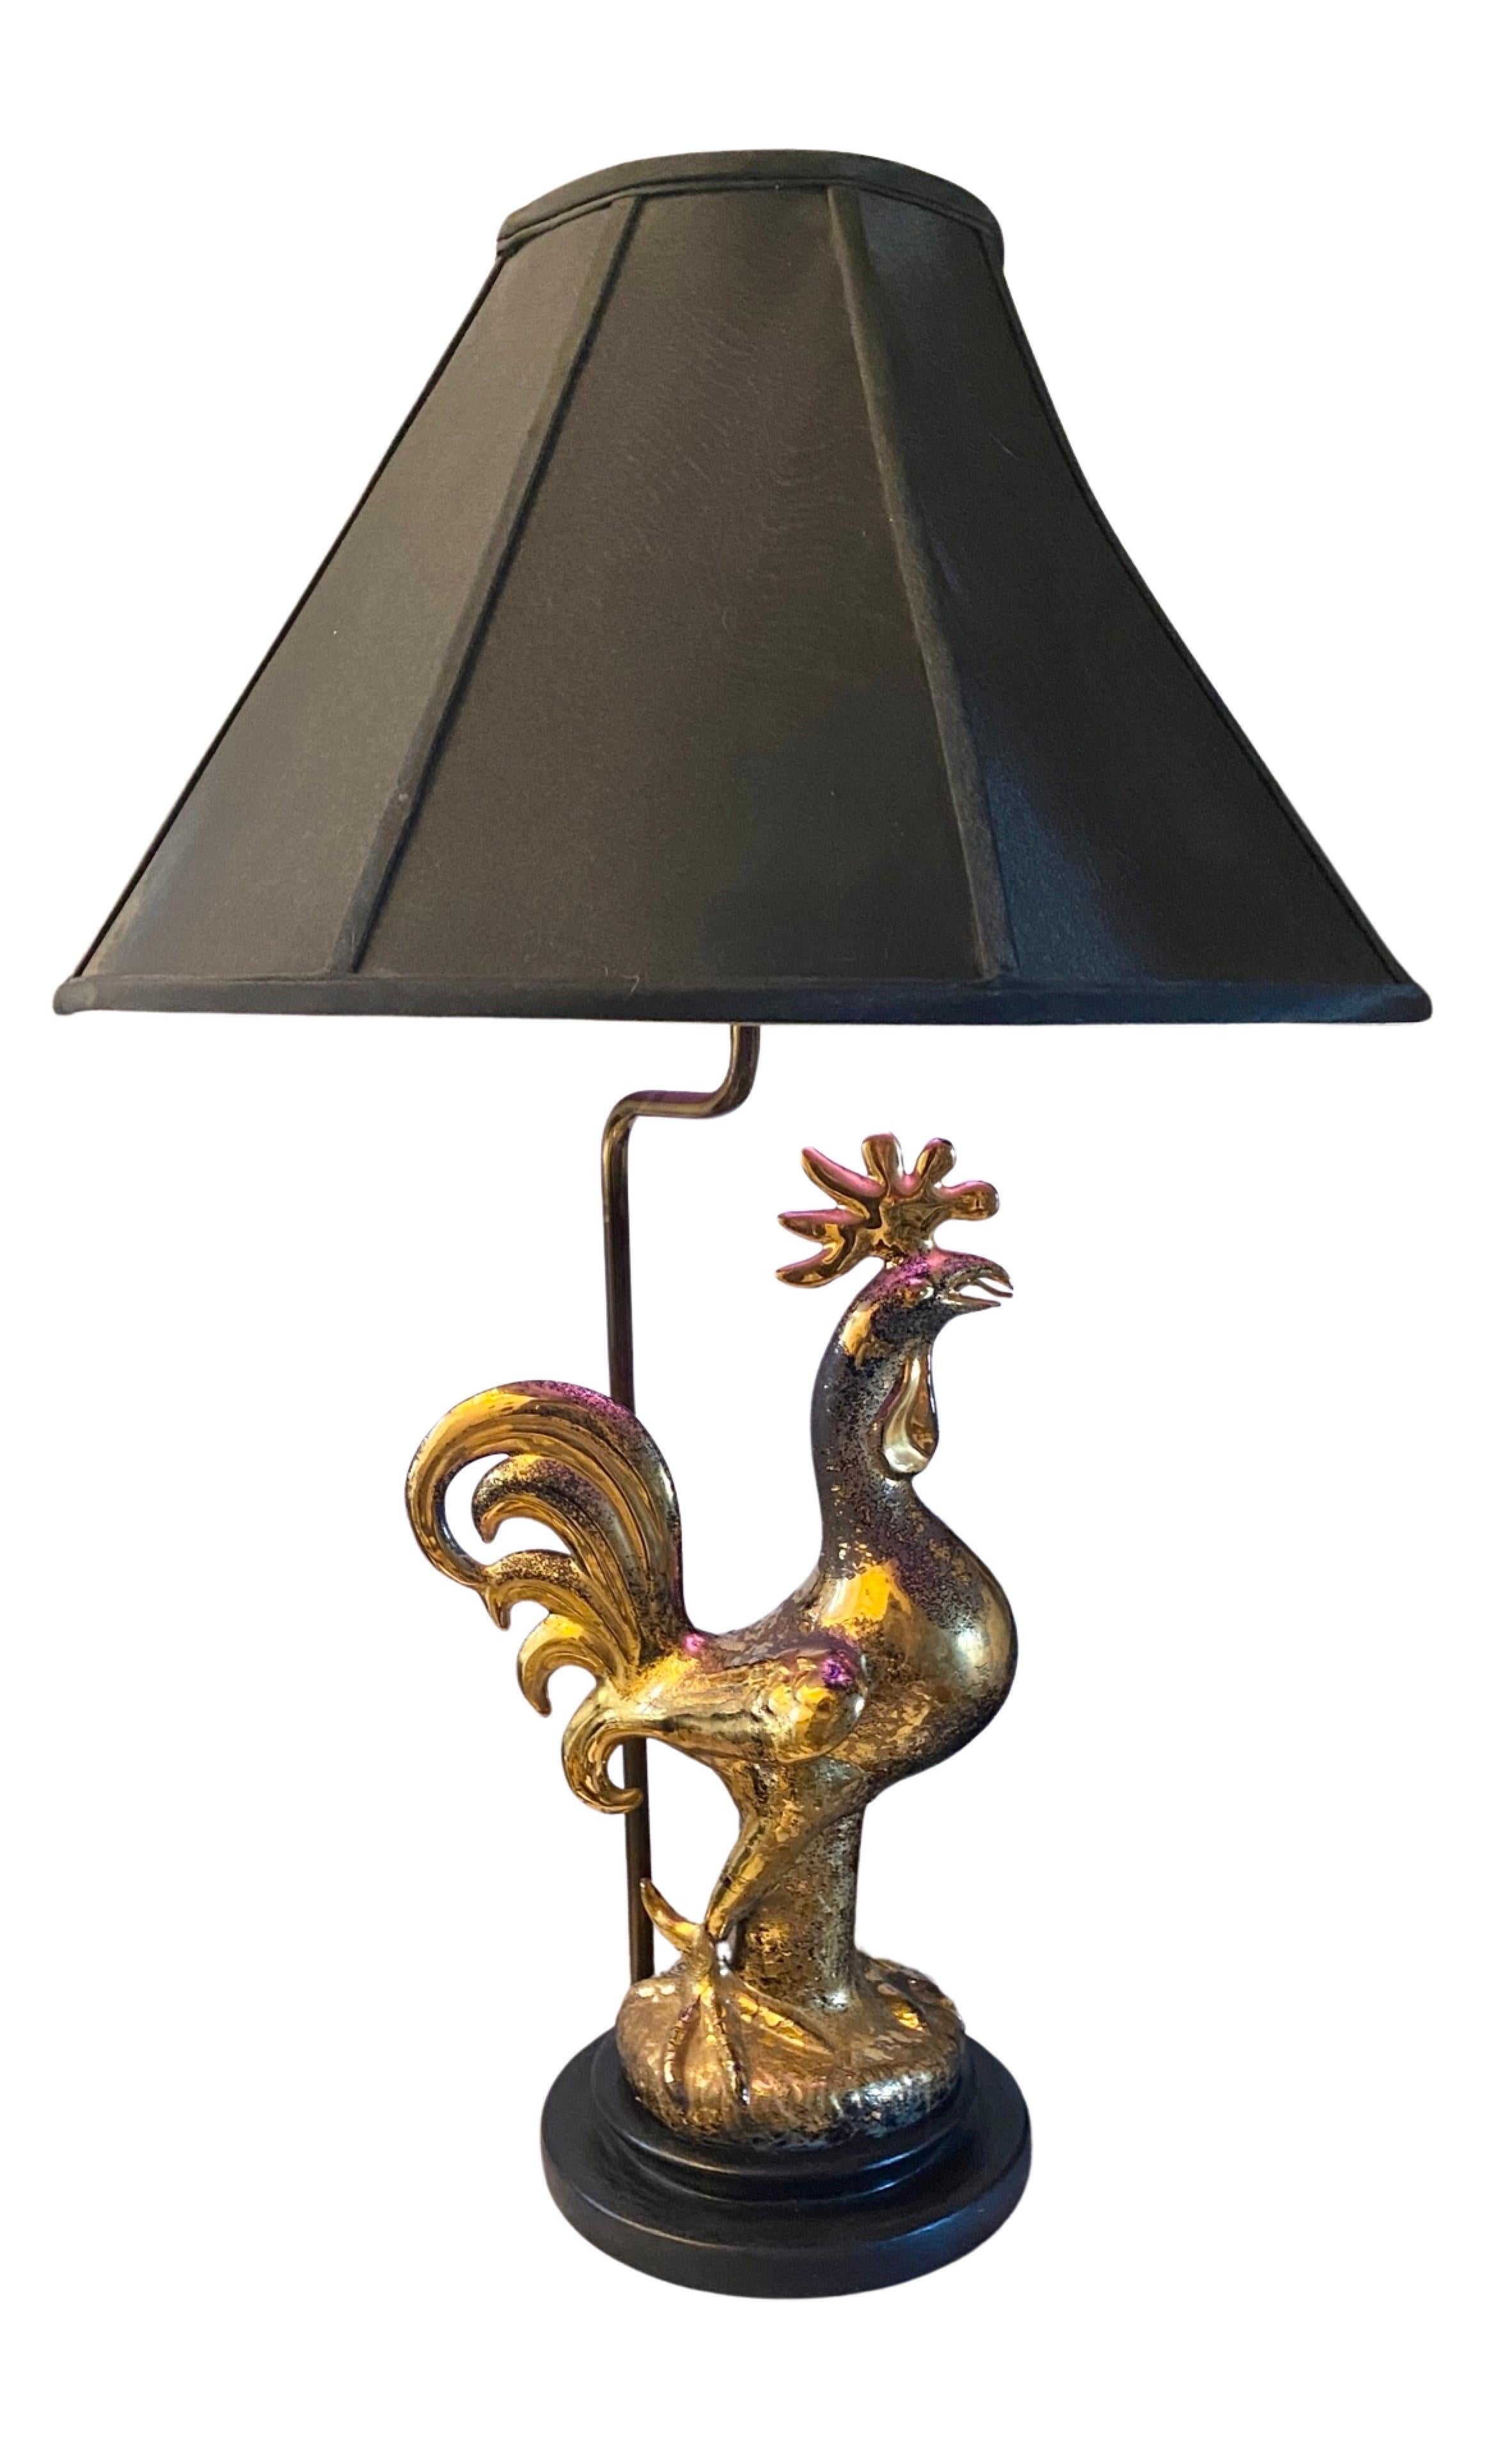 American Sascha Brastoff One of a Kind Gold Plated and Black Rooster Table Lamp  Signed  For Sale